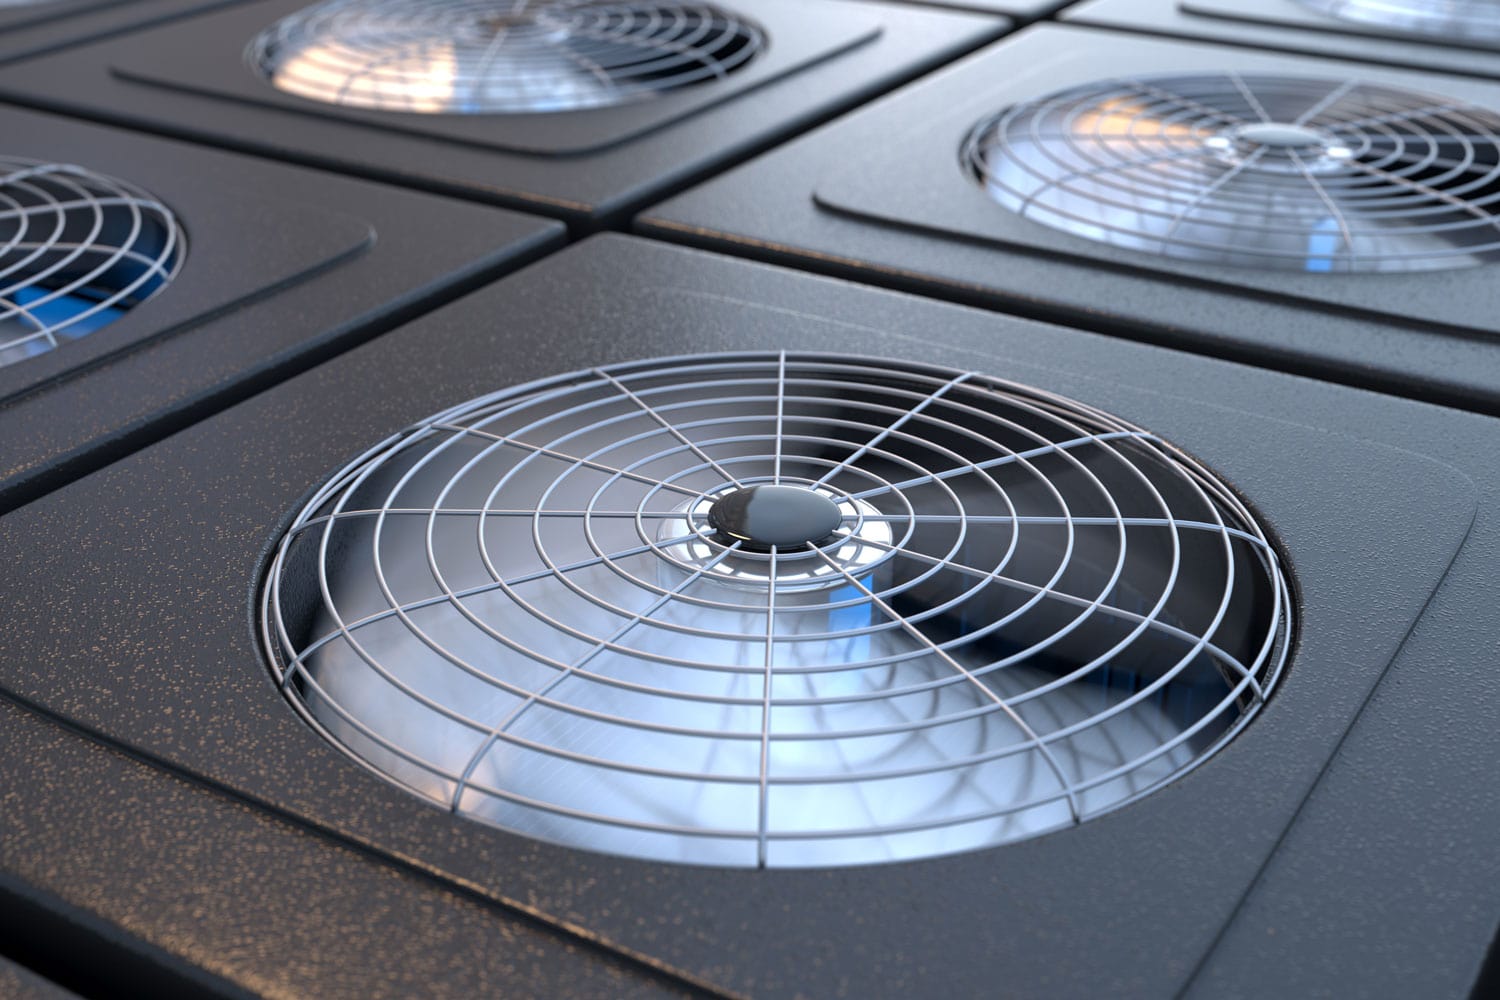 Hvac system fan runs to high for an amount of time might cause malfunction